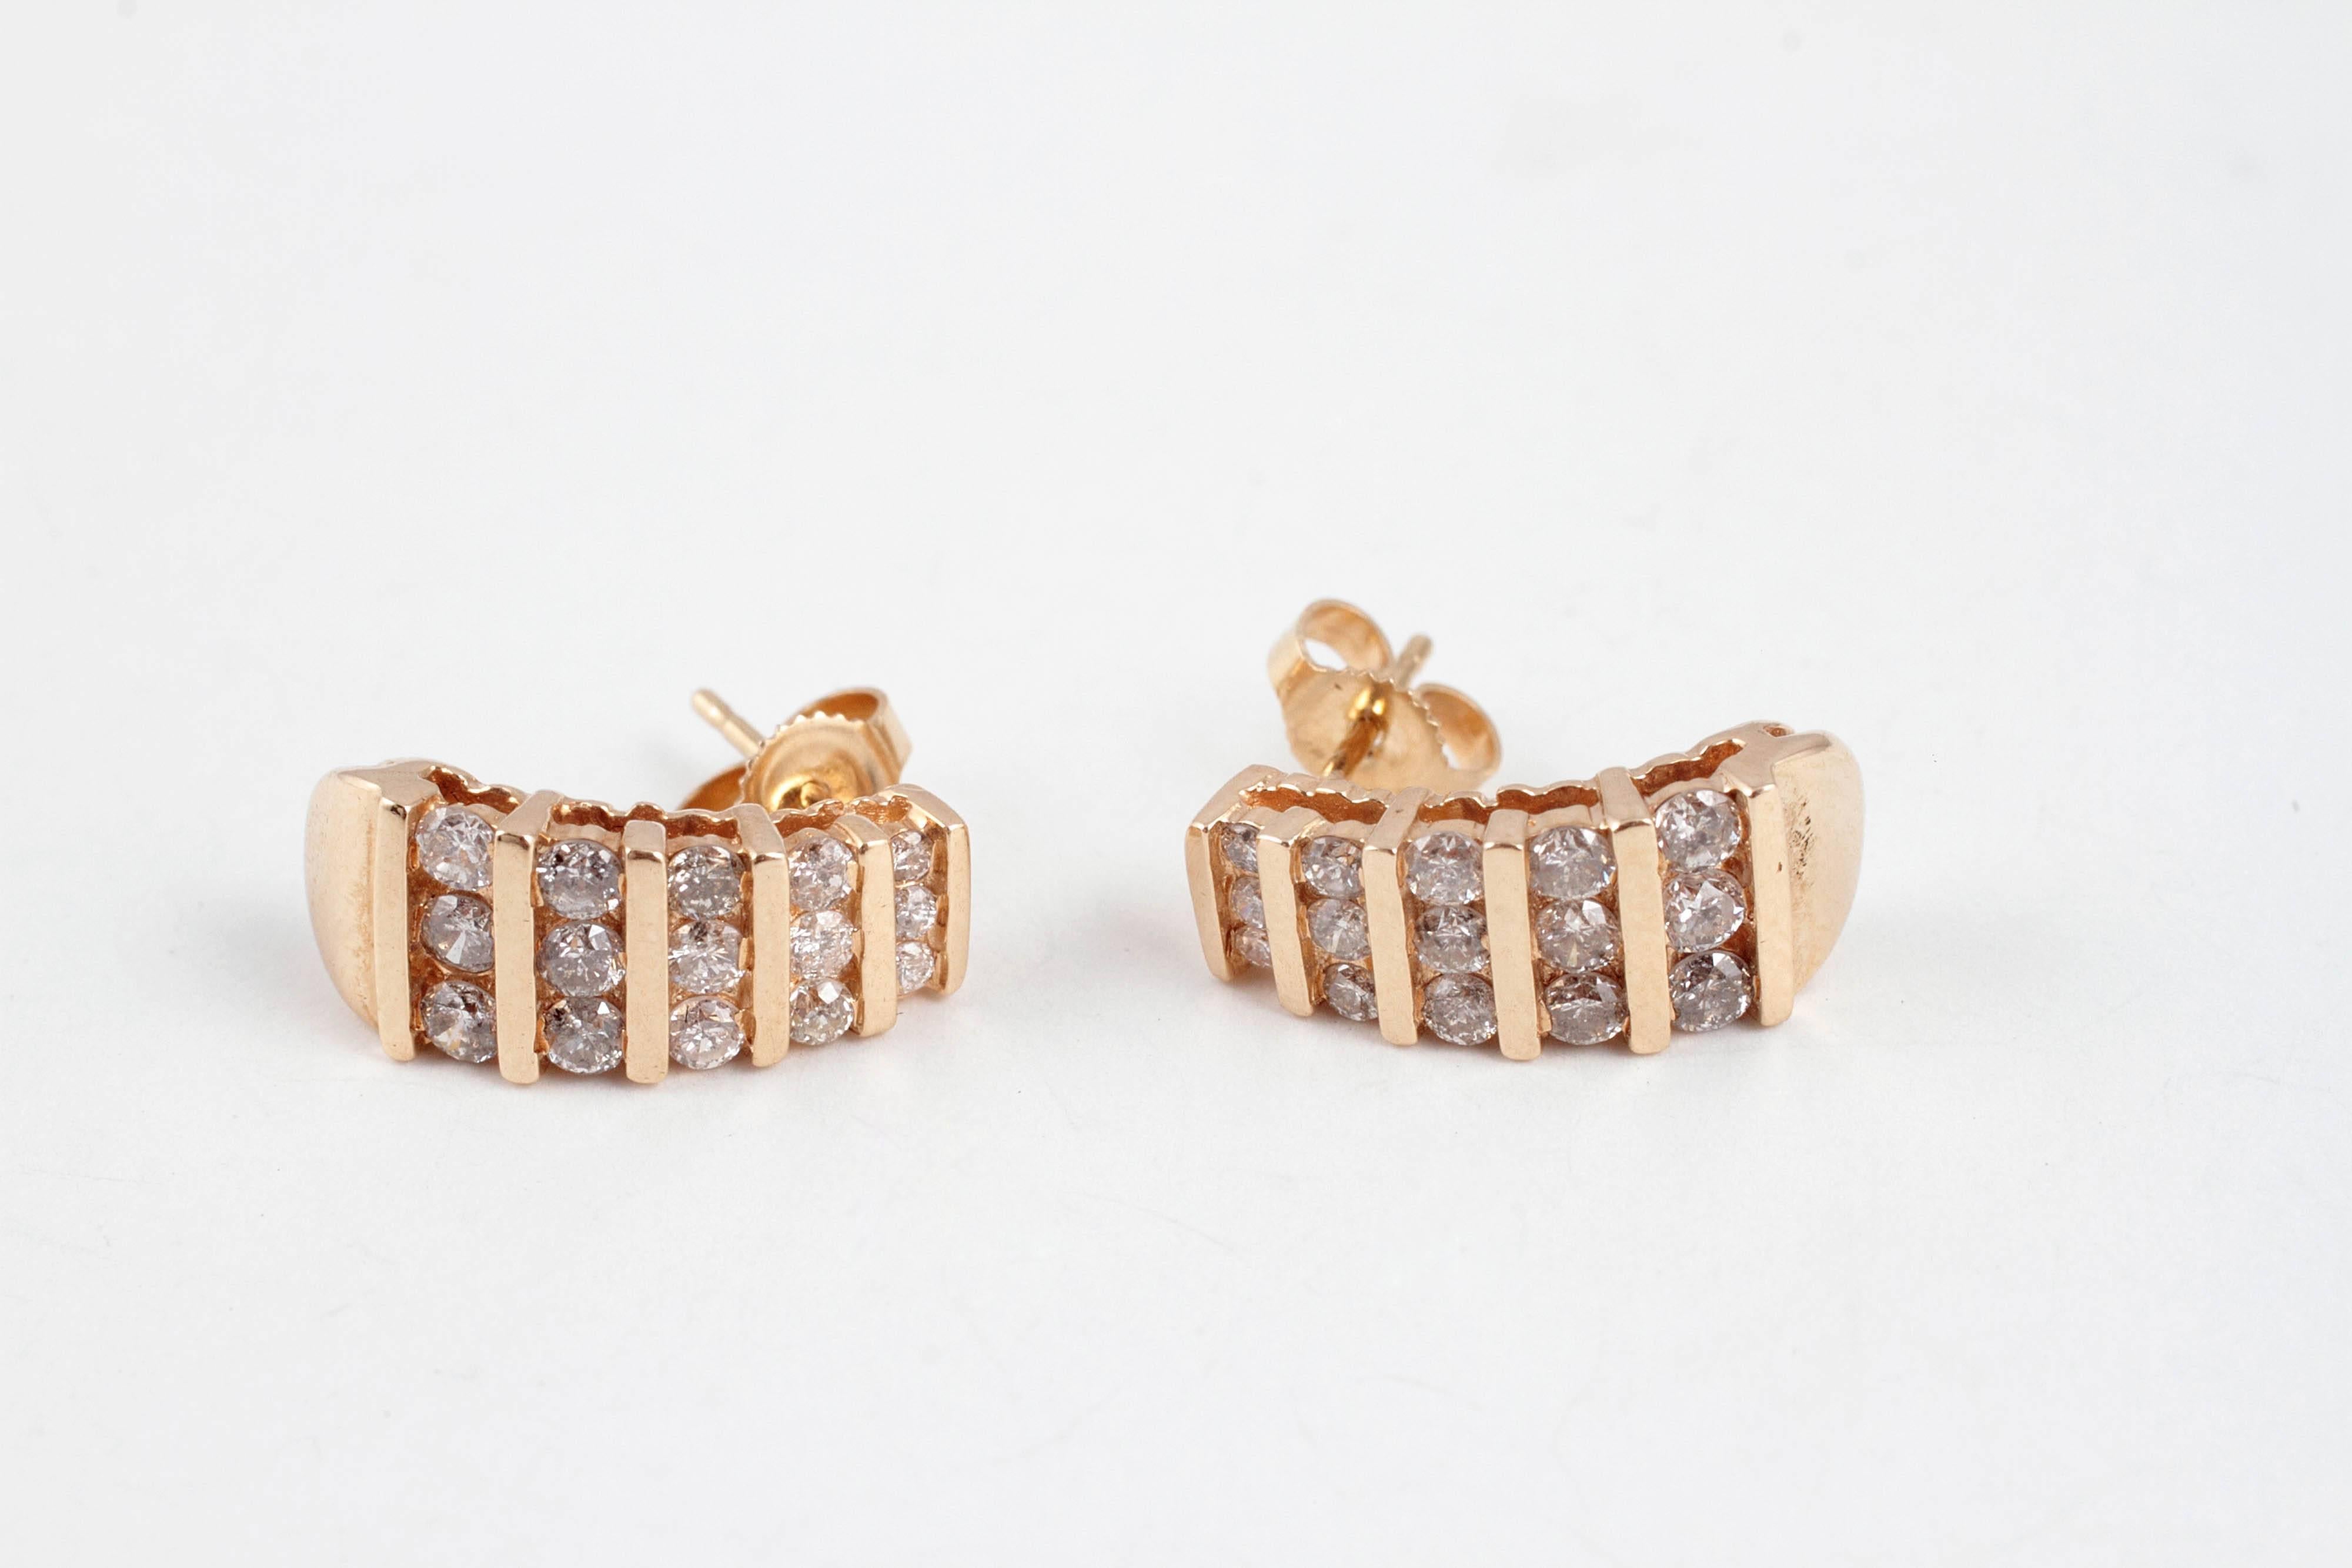 Every girl needs a pair of diamond earrings - right?  These are the 